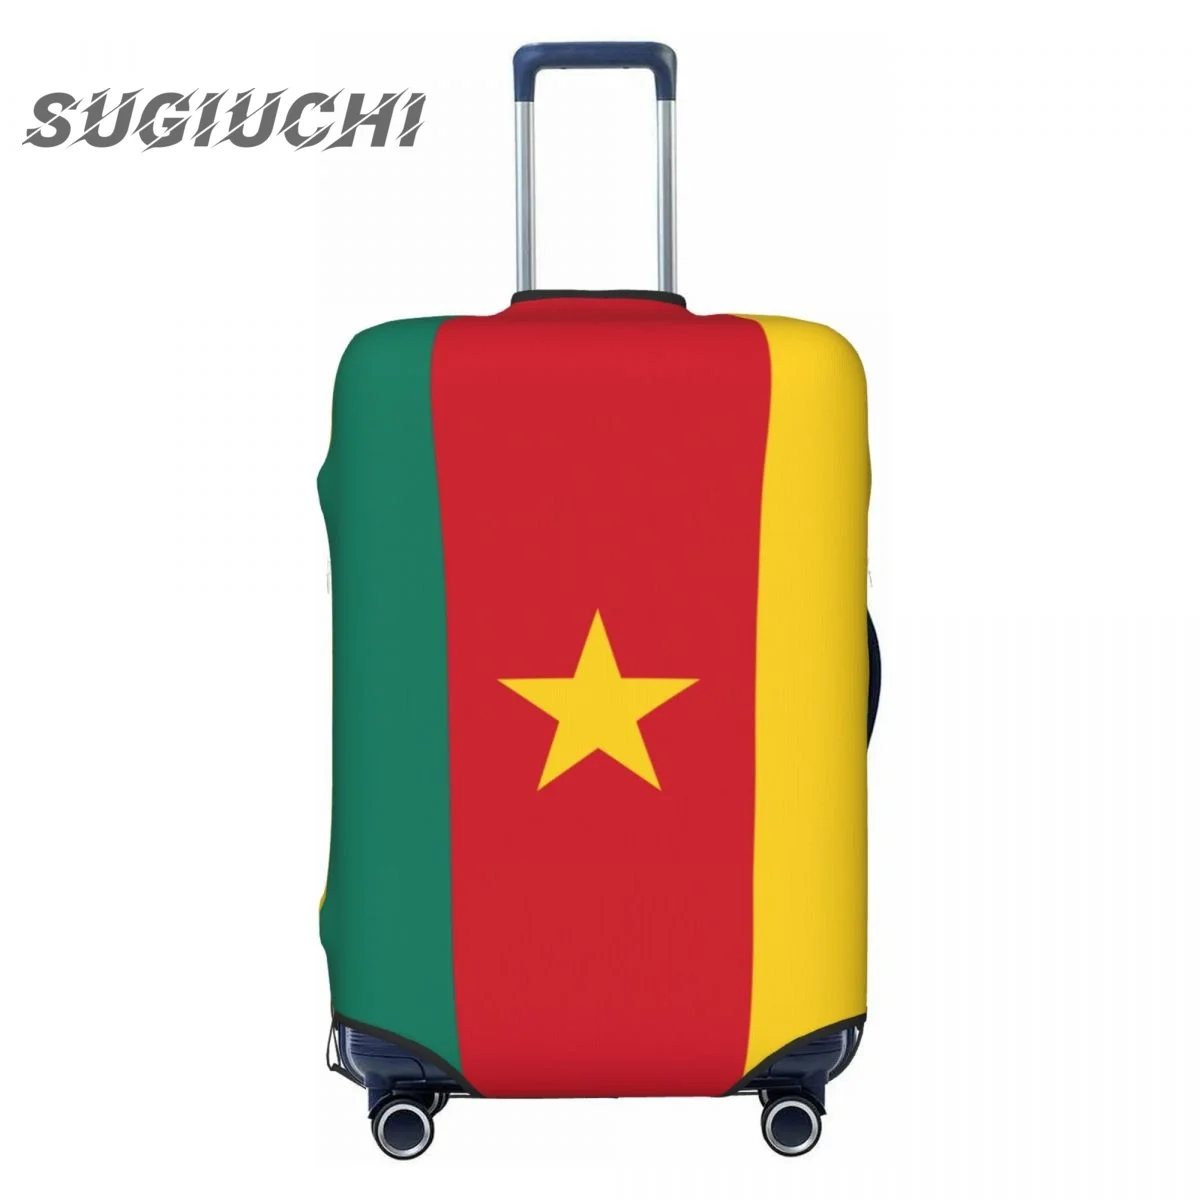 

Cameroon Country Flag Luggage Cover Suitcase Travel Accessories Printed Elastic Dust Cover Bag Trolley Case Protective